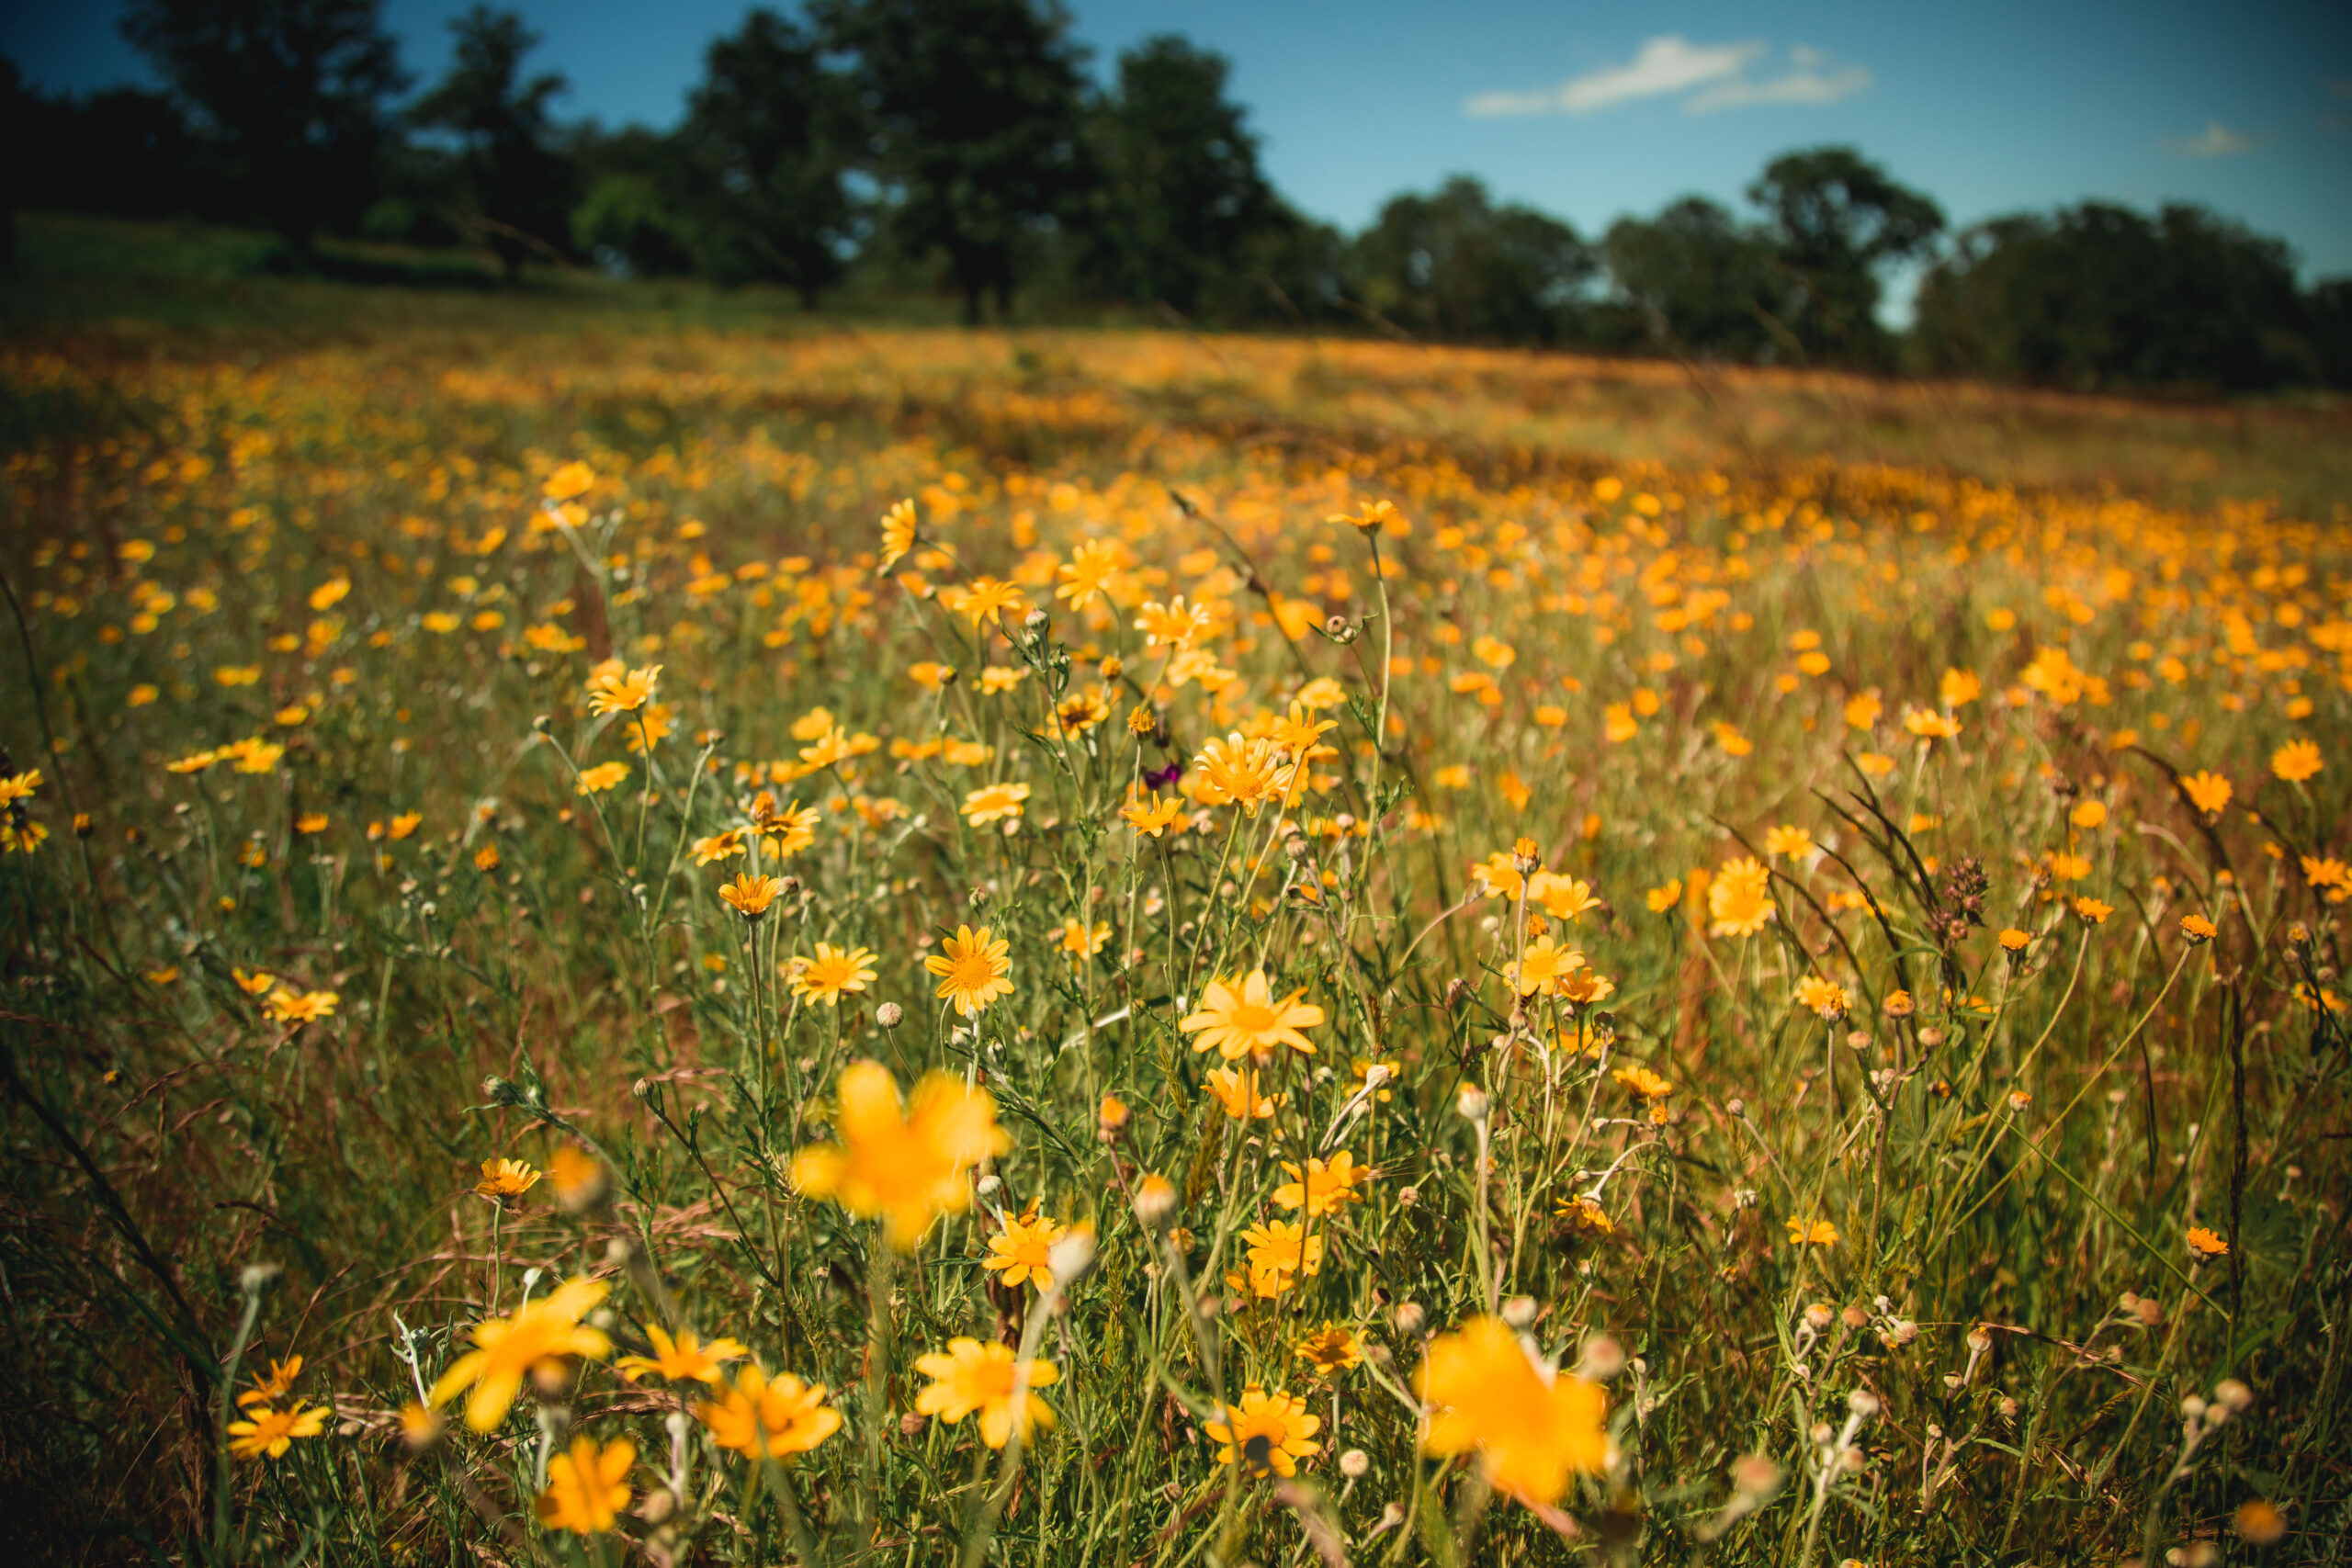 Decorative picture containing yellow wildflowers.